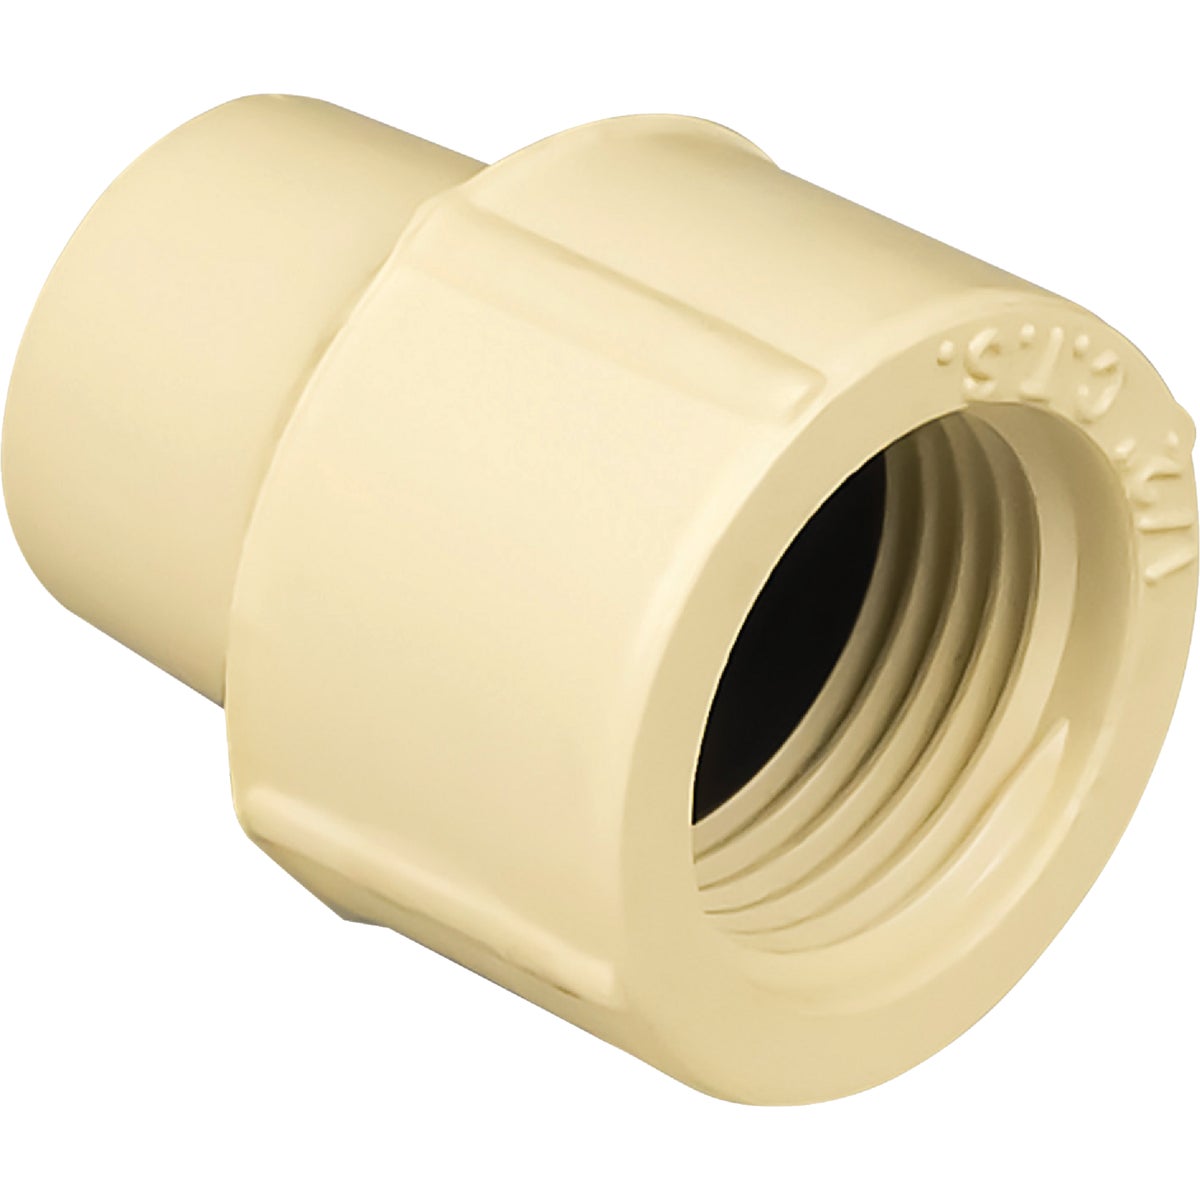 Item 403652, 1" Female adapter with washer made of CPVC (Chlorinated Polyvinyl Chloride